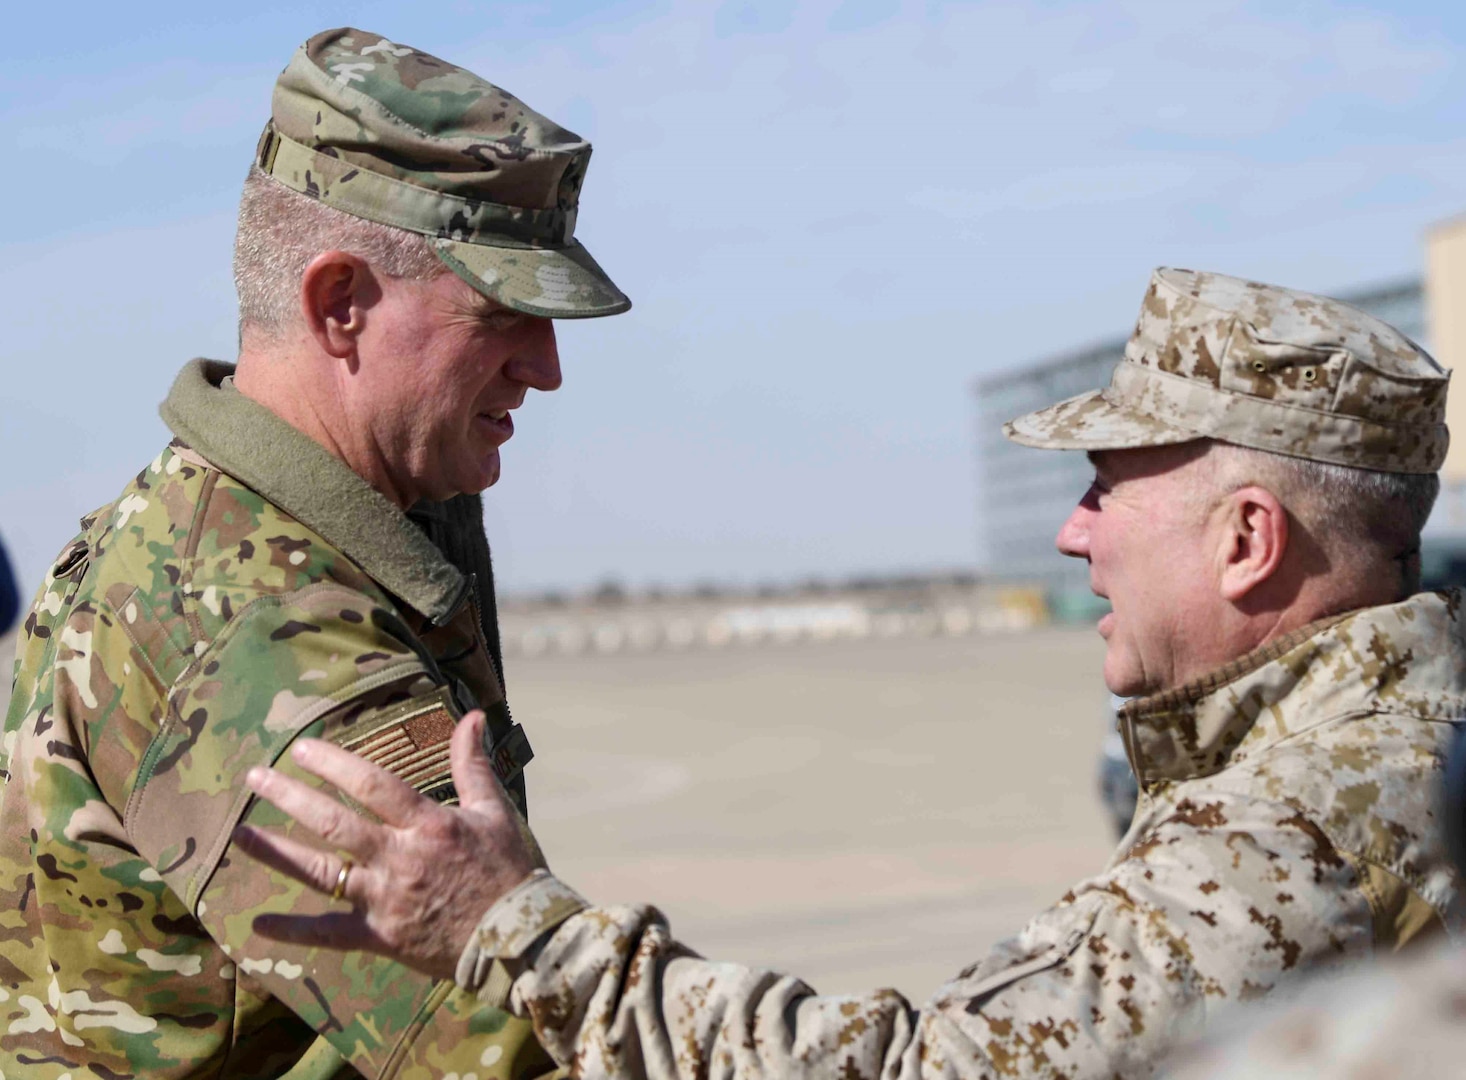 U.S. Air Force Brig. Gen. John C. Walker, left, 378th Air Expeditionary Wing commander, greets U.S. Marine Corps Gen. Kenneth F. McKenzie Jr., right, commander, United States Central Command, at Prince Sultan Air Base, Kingdom of Saudi Arabia, Jan. 29, 2020. The CENTCOM command team’s tour of installations in the command’s area of responsibility underscores the U.S.’s commitment to regional security, the flexibility of American military power, and the importance of military-to-military relationships with coalition partners. (U.S. Air Force photo by Senior Airman Giovanni Sims)